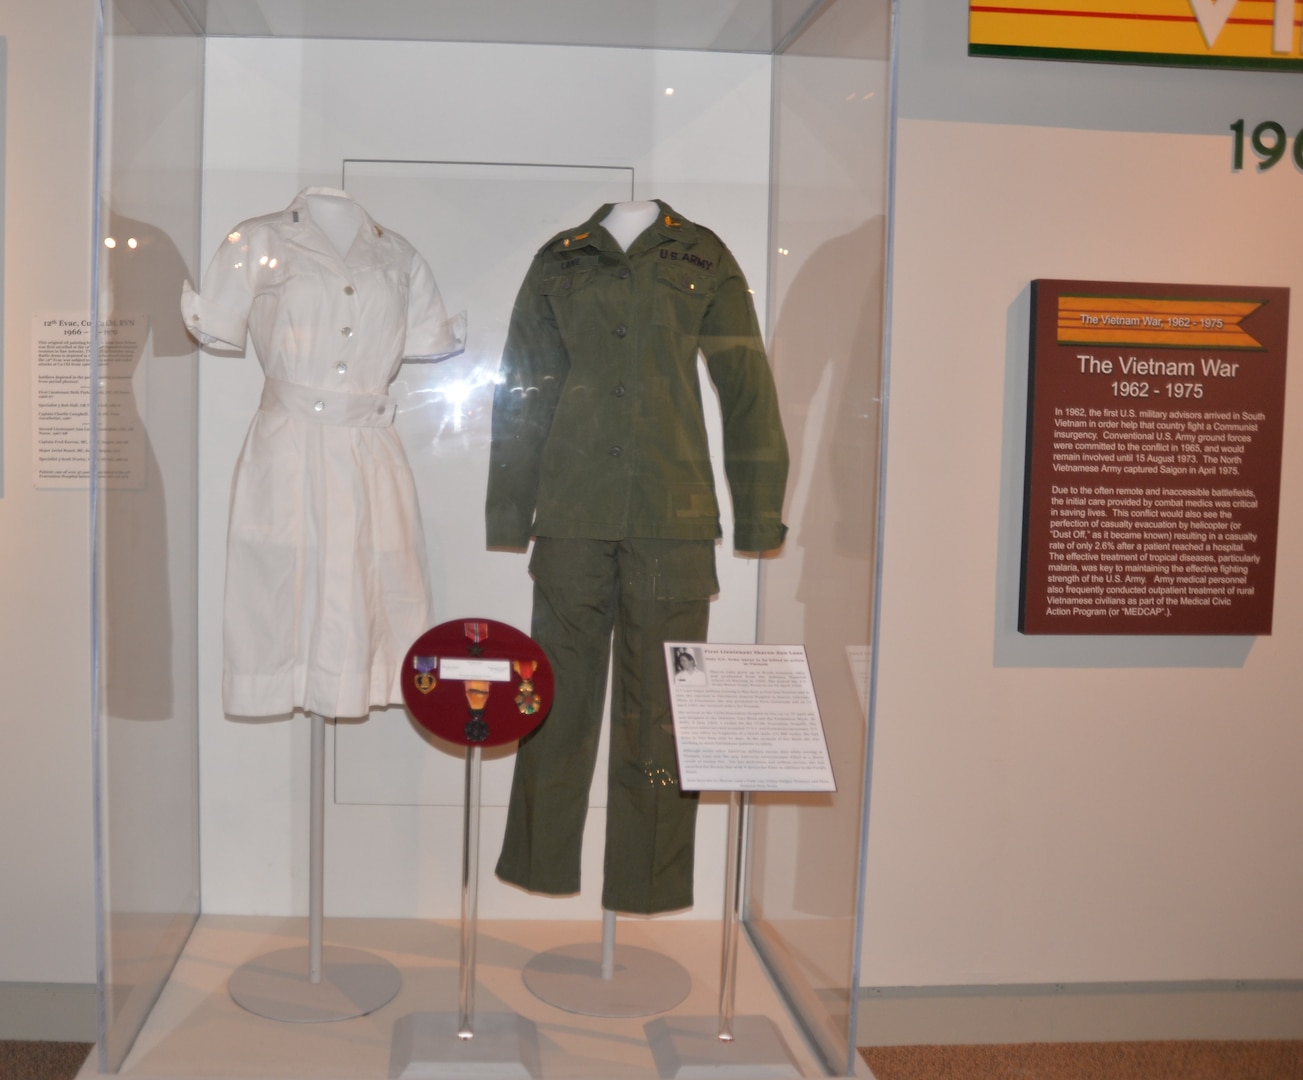 The duty dress and utility fatigue trousers and shirt worn by 1st Lt. Sharon Lane, a U.S. Army nurse who served in the Vietnam War, are included in a new exhibit about Lane recently installed at the U.S. Army Medical Department Museum at Joint Base San Antonio-Fort Sam Houston. Lane was killed in June 1969 at the 312th Evacuation Hospital in Chu Lai, South Vietnam from mortar and rocket fire directed at the hospital by Viet Cong forces. Other artifacts in the exhibit include the Bronze Star and Purple Heart medals awarded to her posthumously, and interpretative signage about Lane’s life, service and death. Lane was the only U.S. military nurse killed by enemy fire during the Vietnam War.